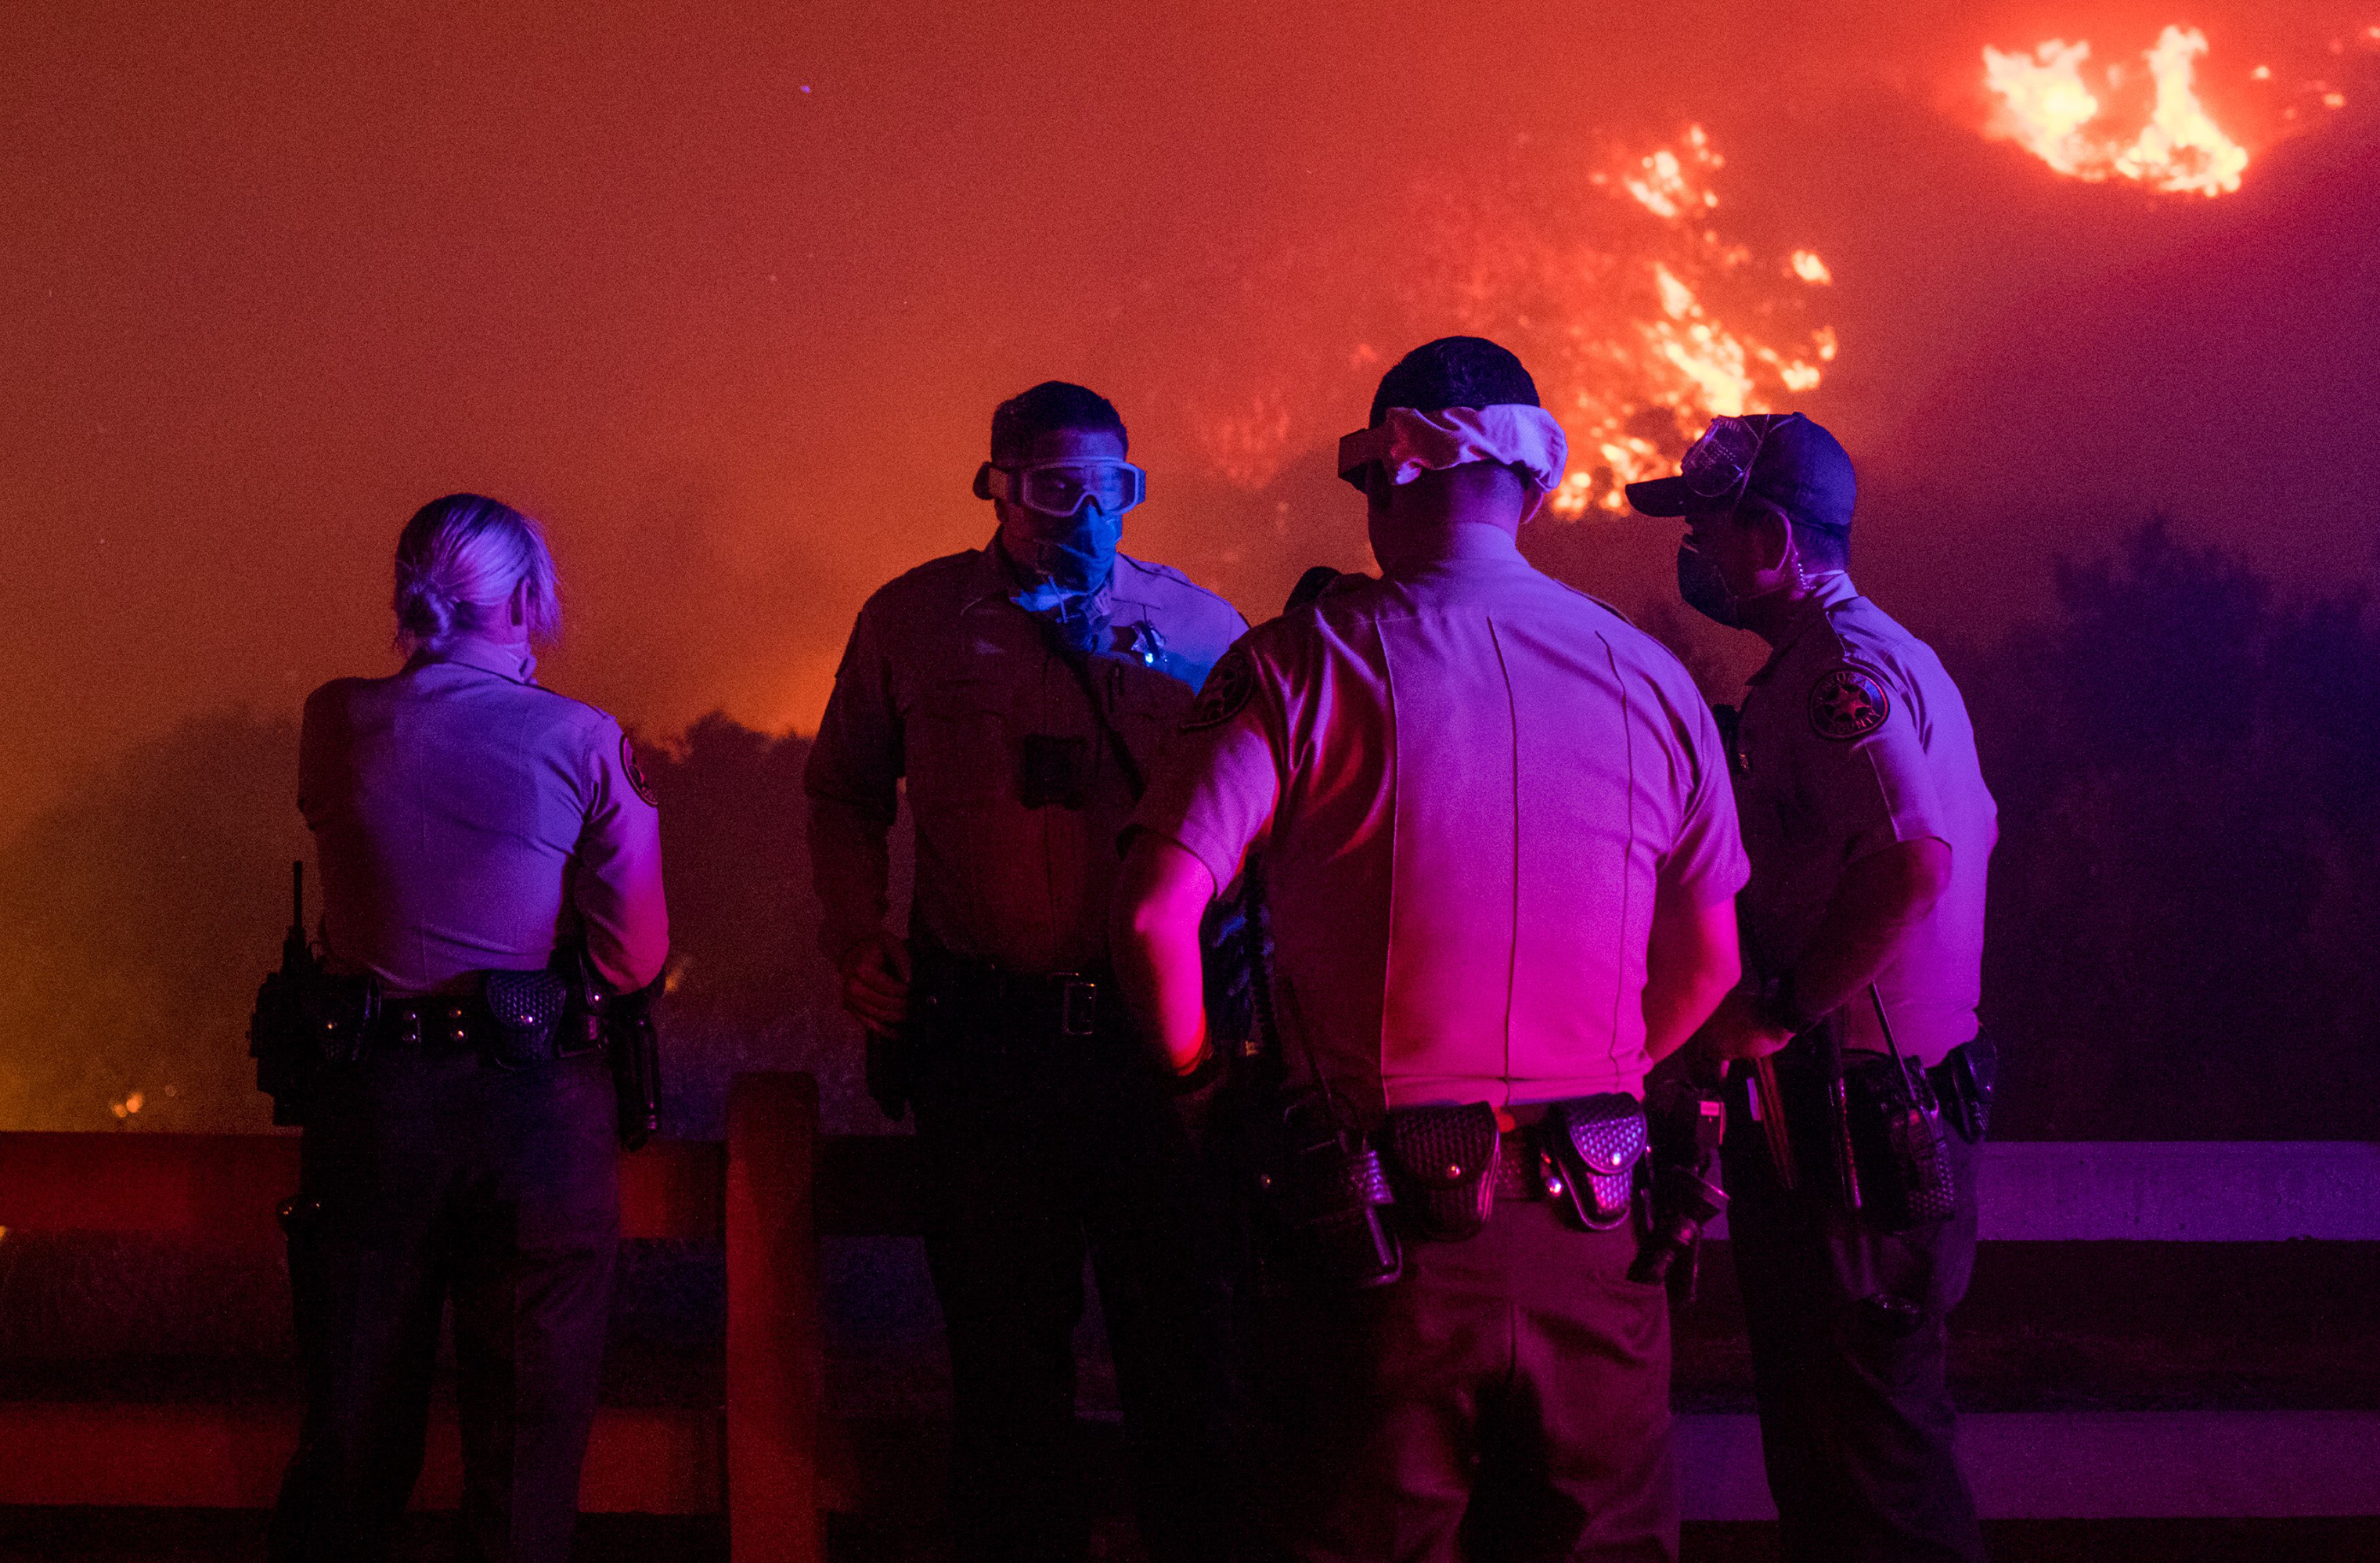 Local law enforcement standby to give mandatory evacuation orders to residents in Thousand Oaks, Calif. as the Wooolsey fire burns over 8,000 acres on Nov. 8. (Christian Monterrosa—Sipa USA)